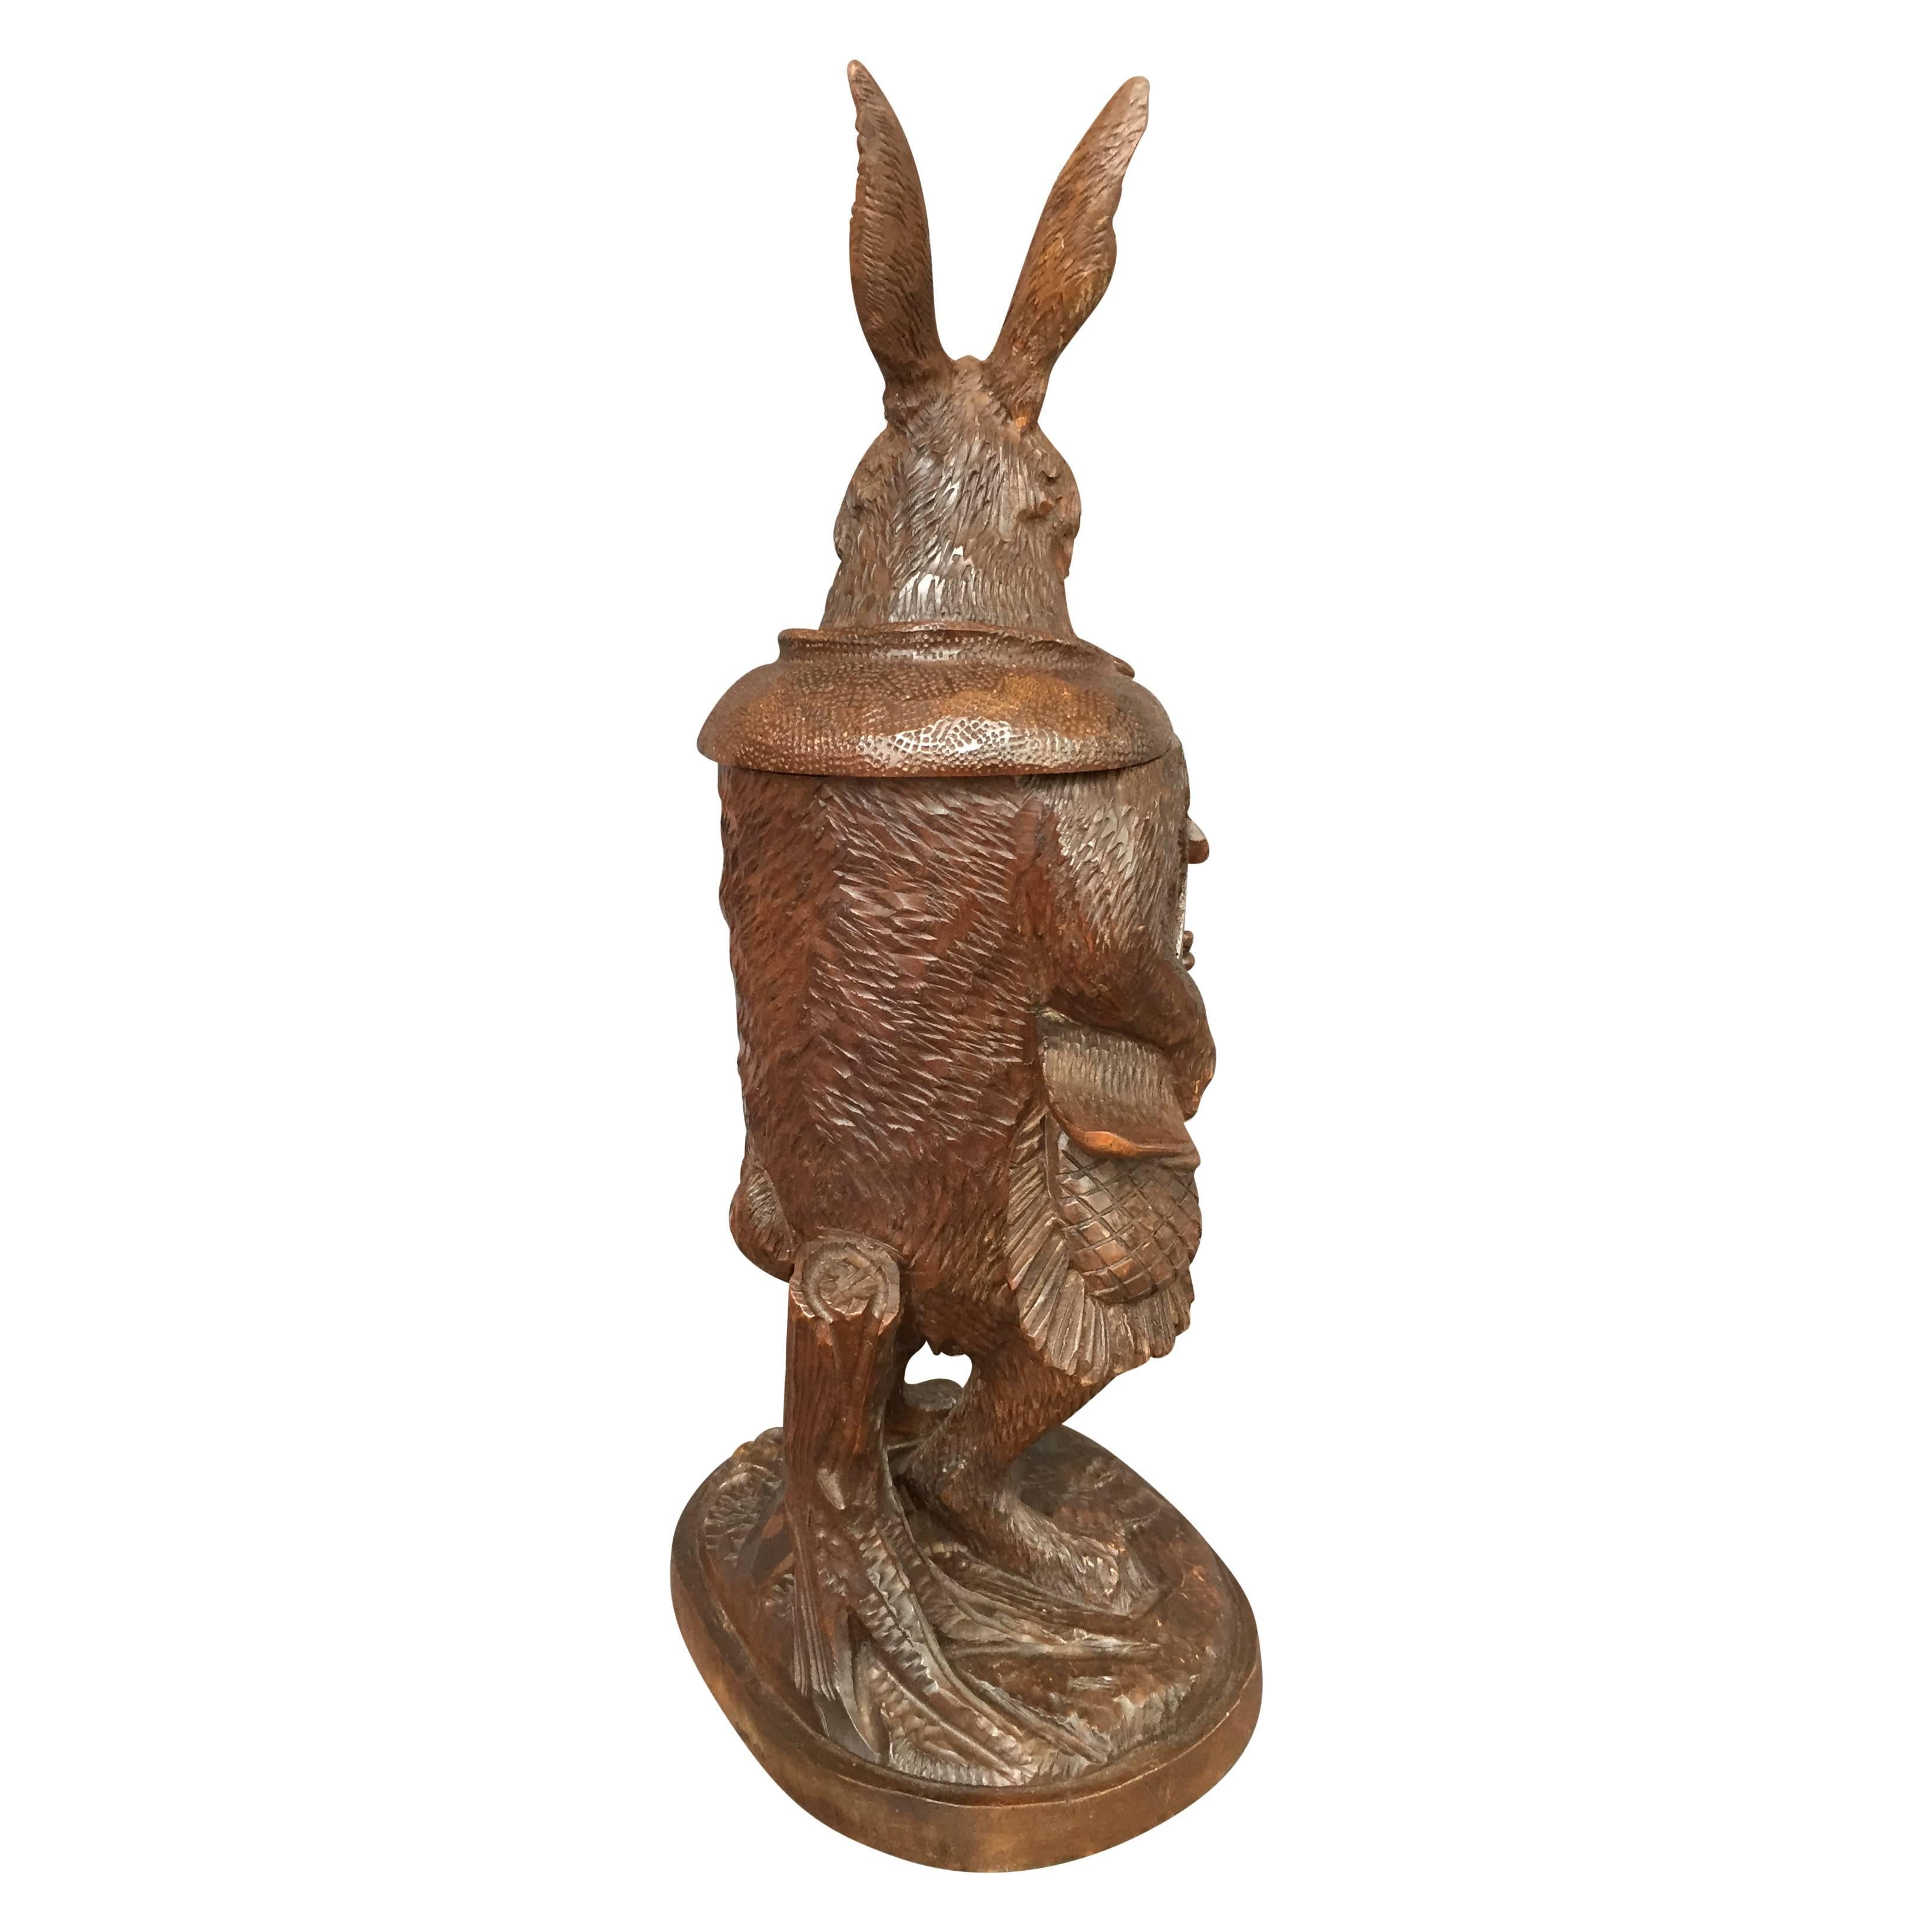 An antique Swiss Black Forest carved walnut tobacco jar modeled after a rabbit traveler. Anthropomorphized animals, such as this rabbit, were a favorite subject of the Swiss Black Forest carvers.